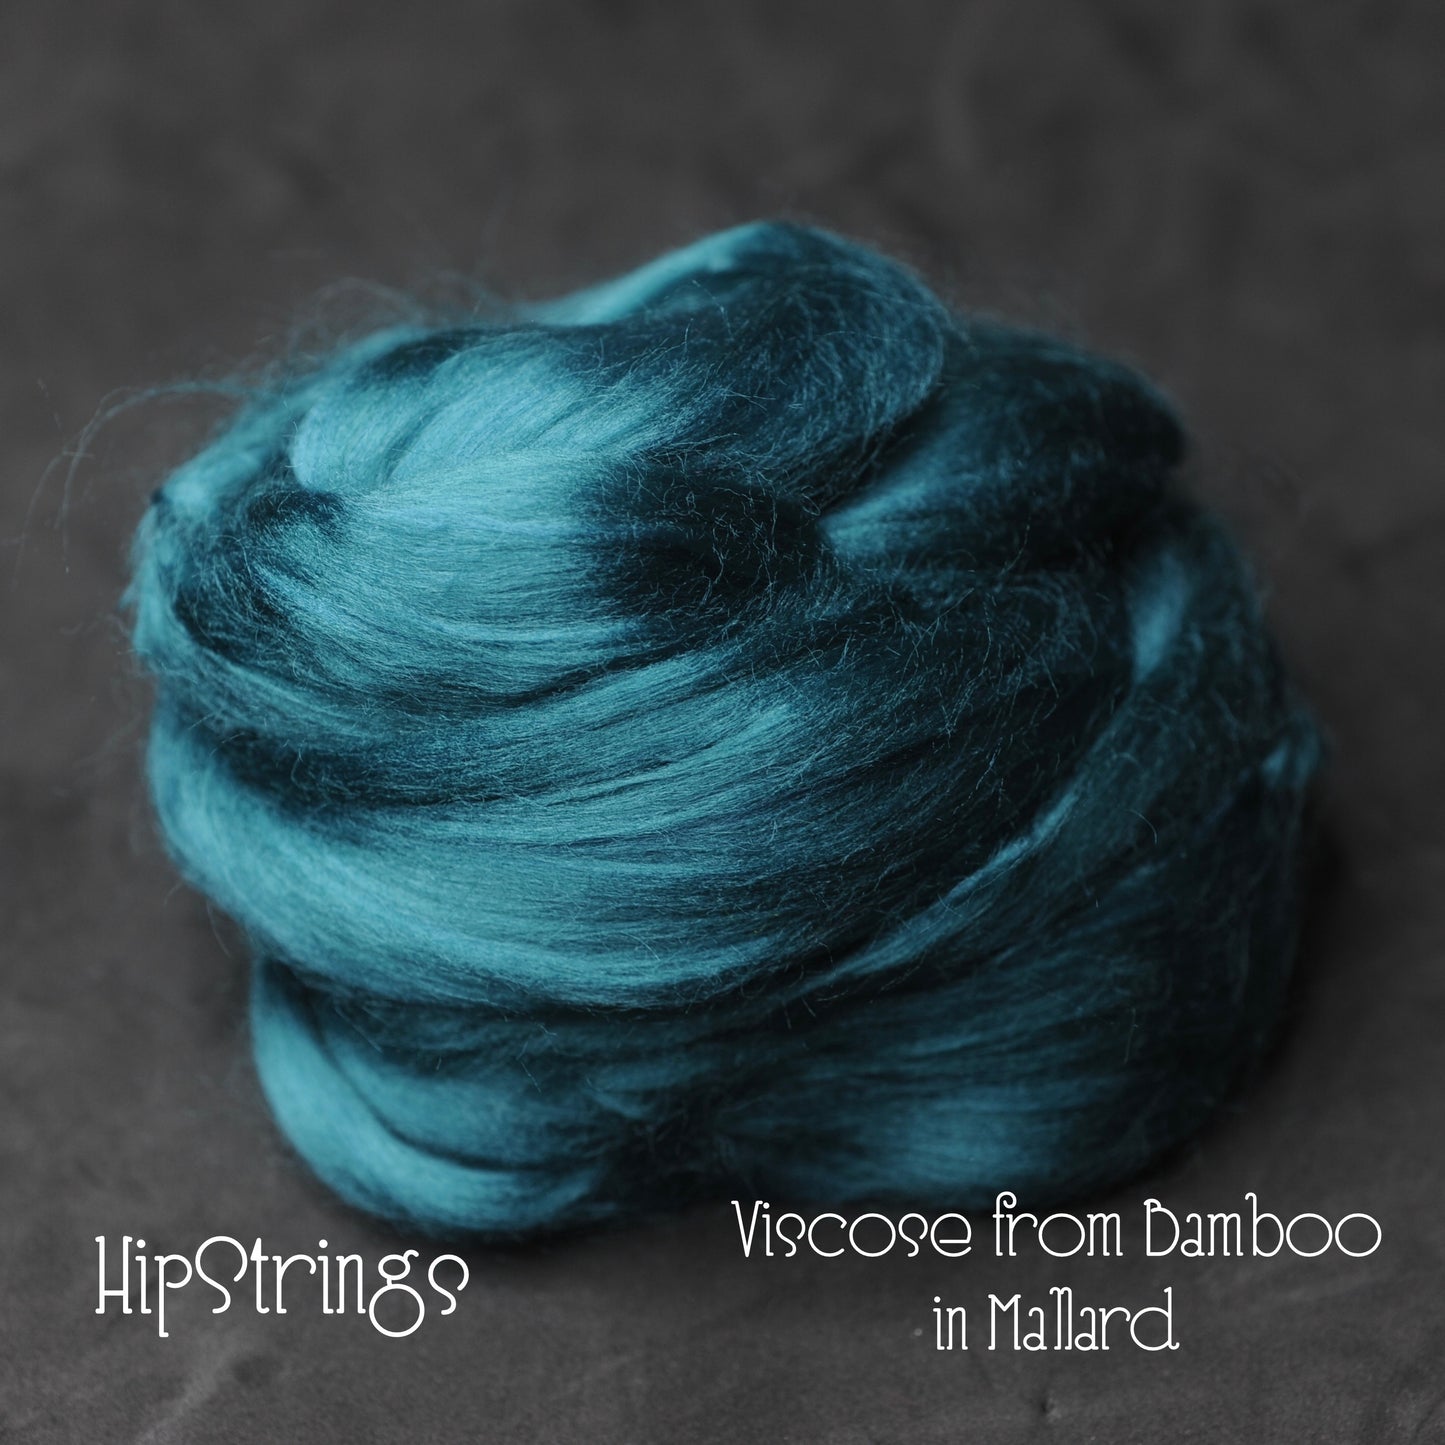 Viscose from Bamboo Combed Top - 1 oz